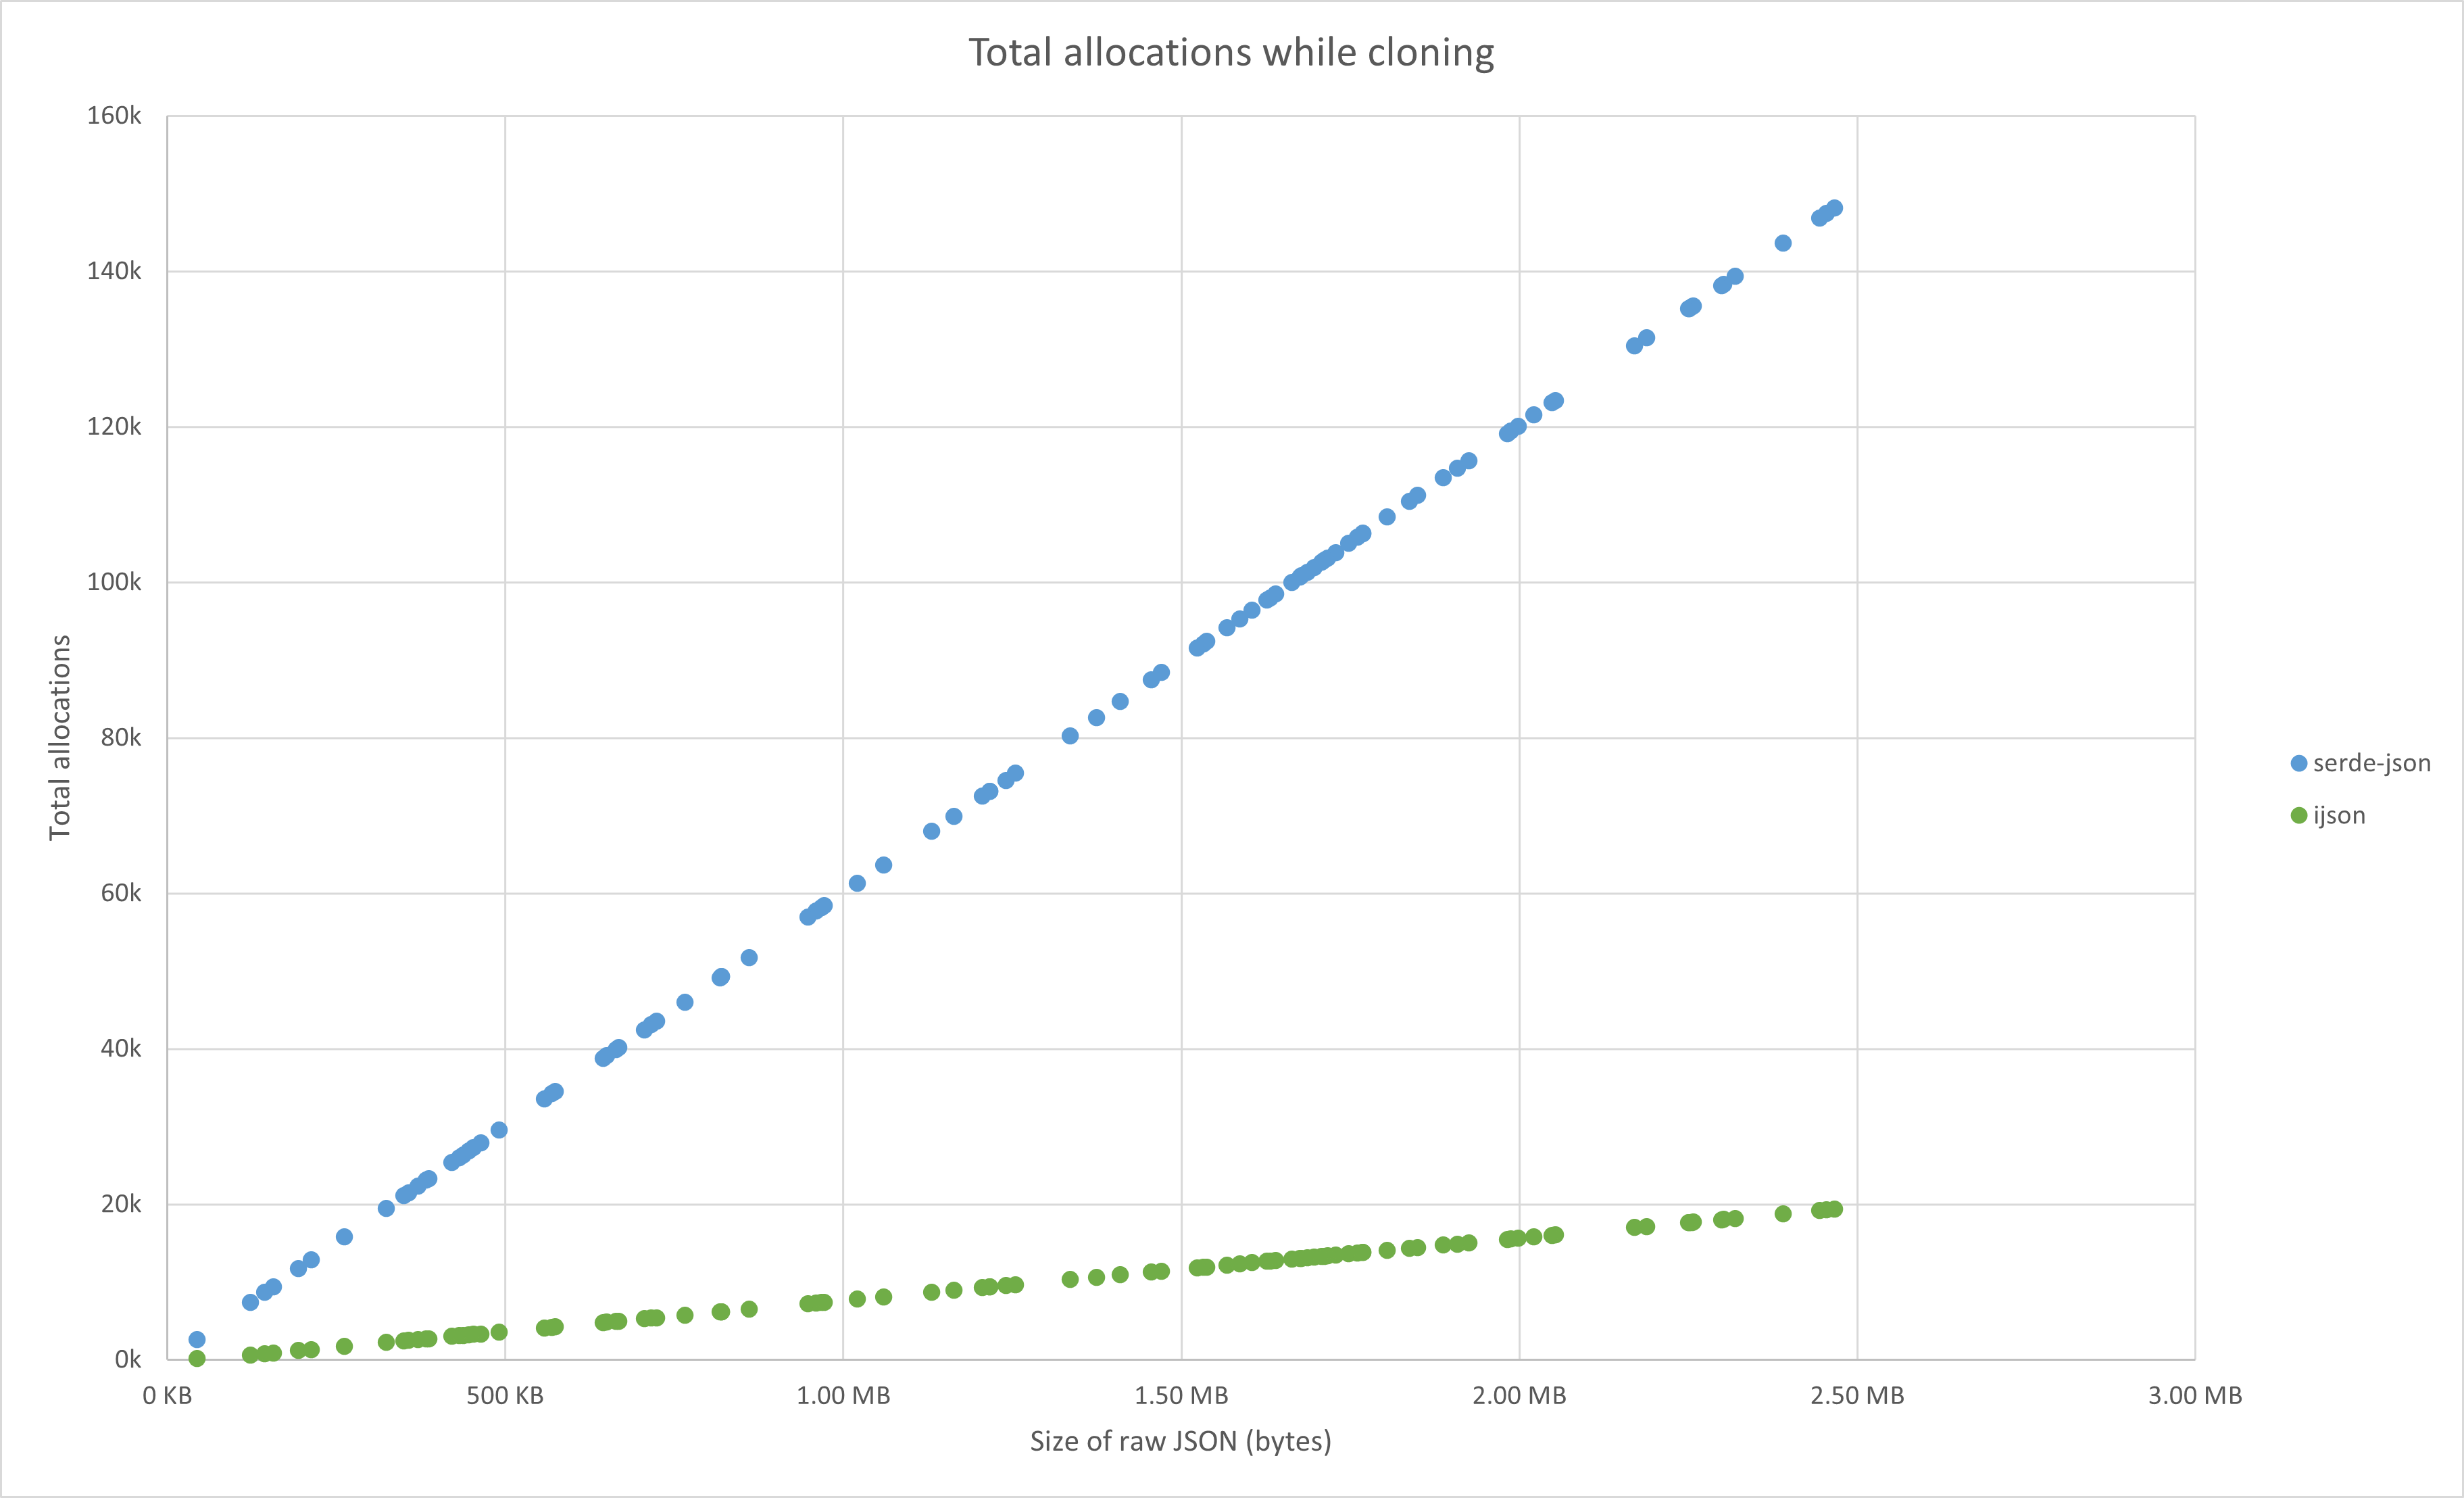 Total allocations when cloning